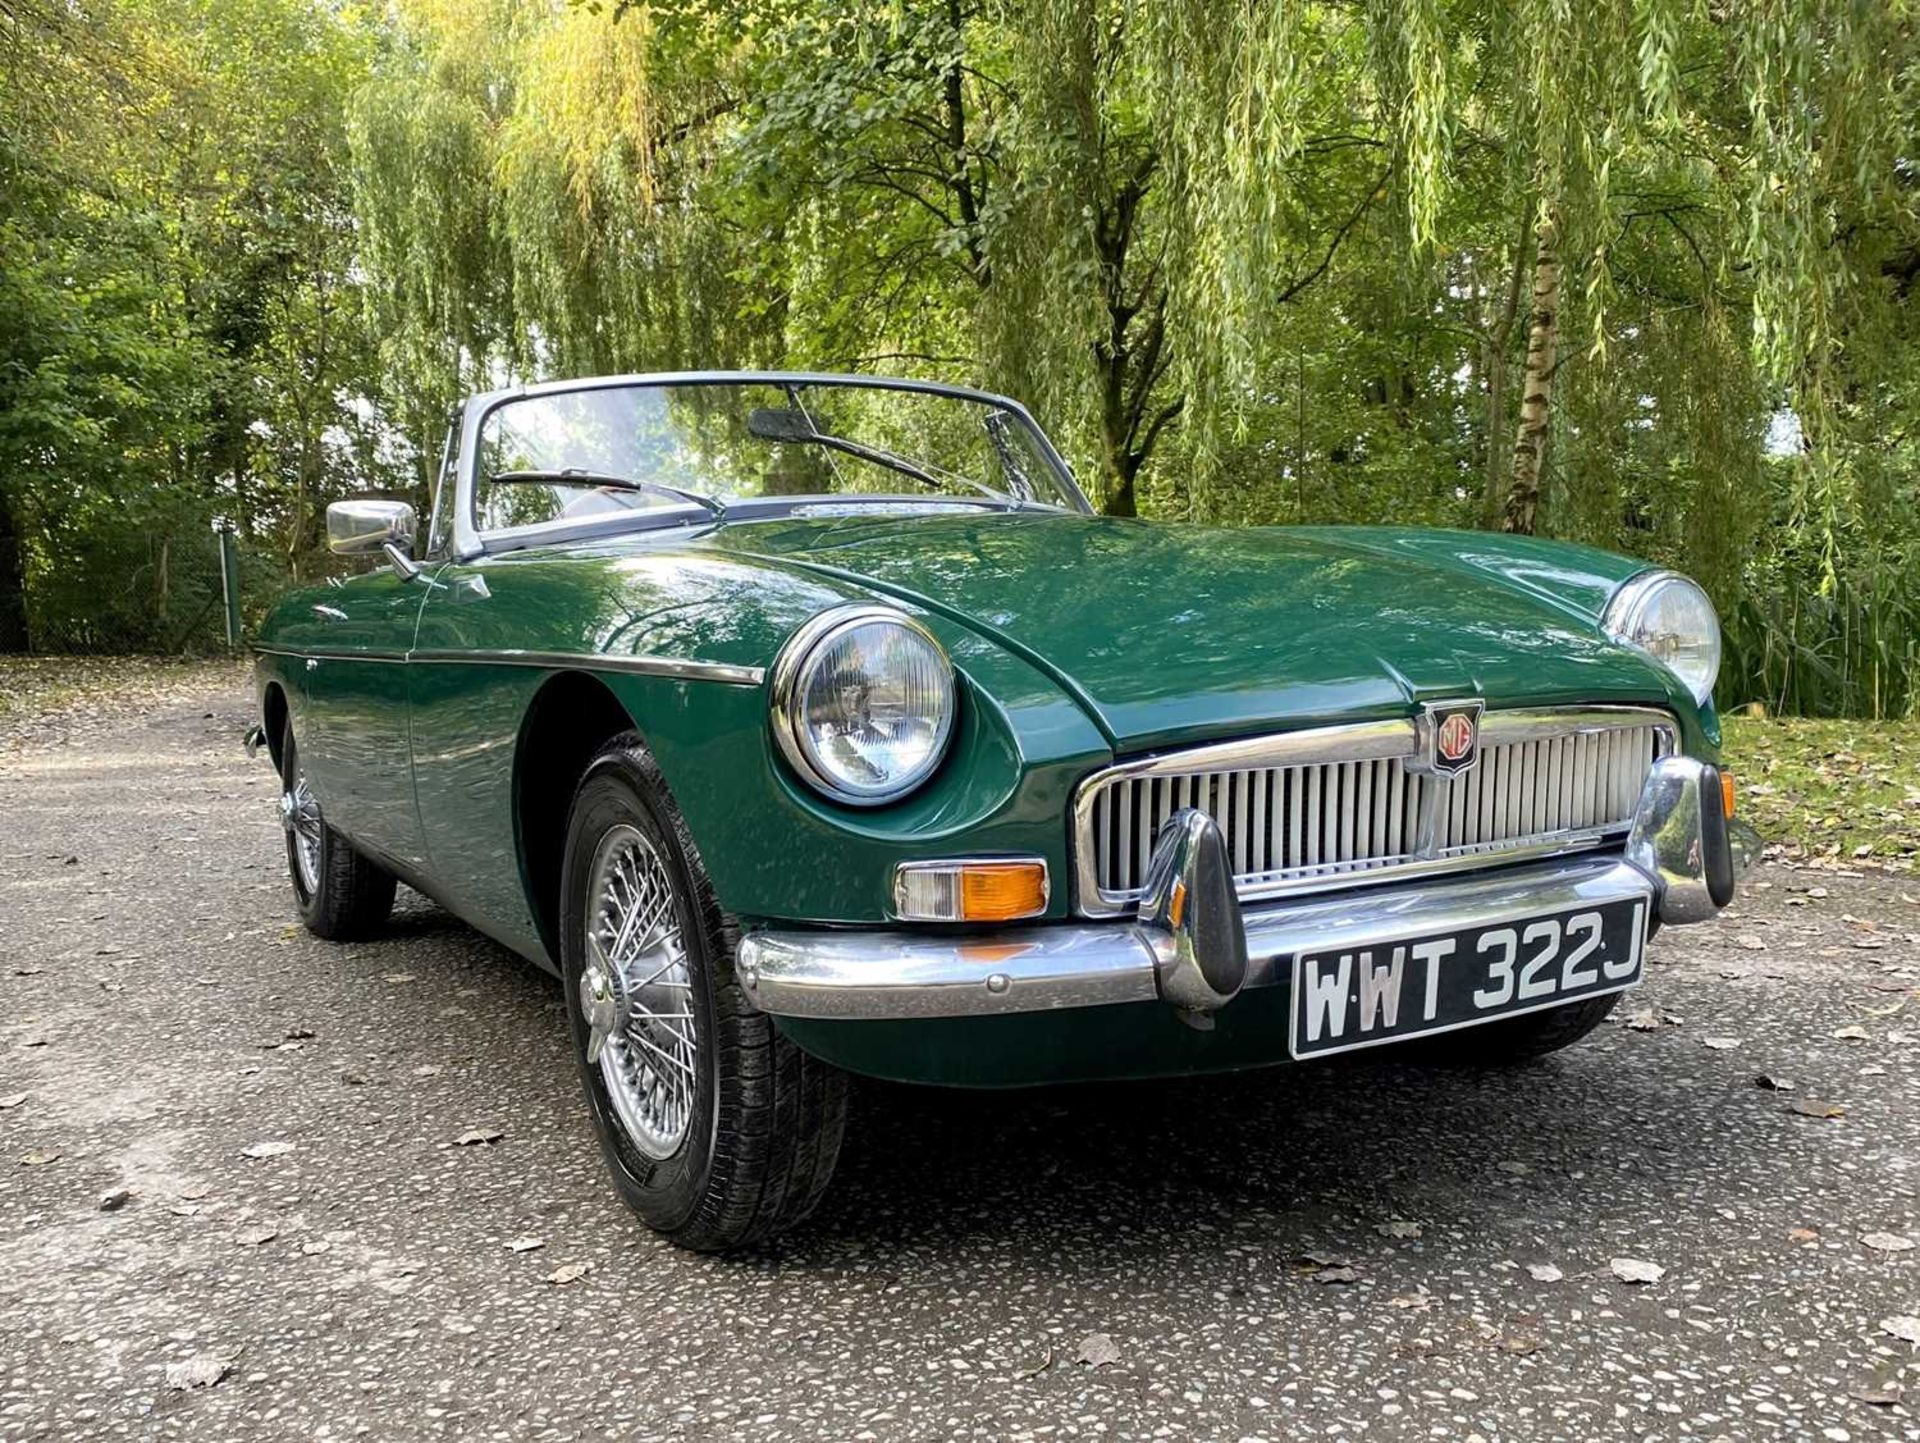 1971 MGB Roadster Restored over recent years with invoices exceeding £20,000